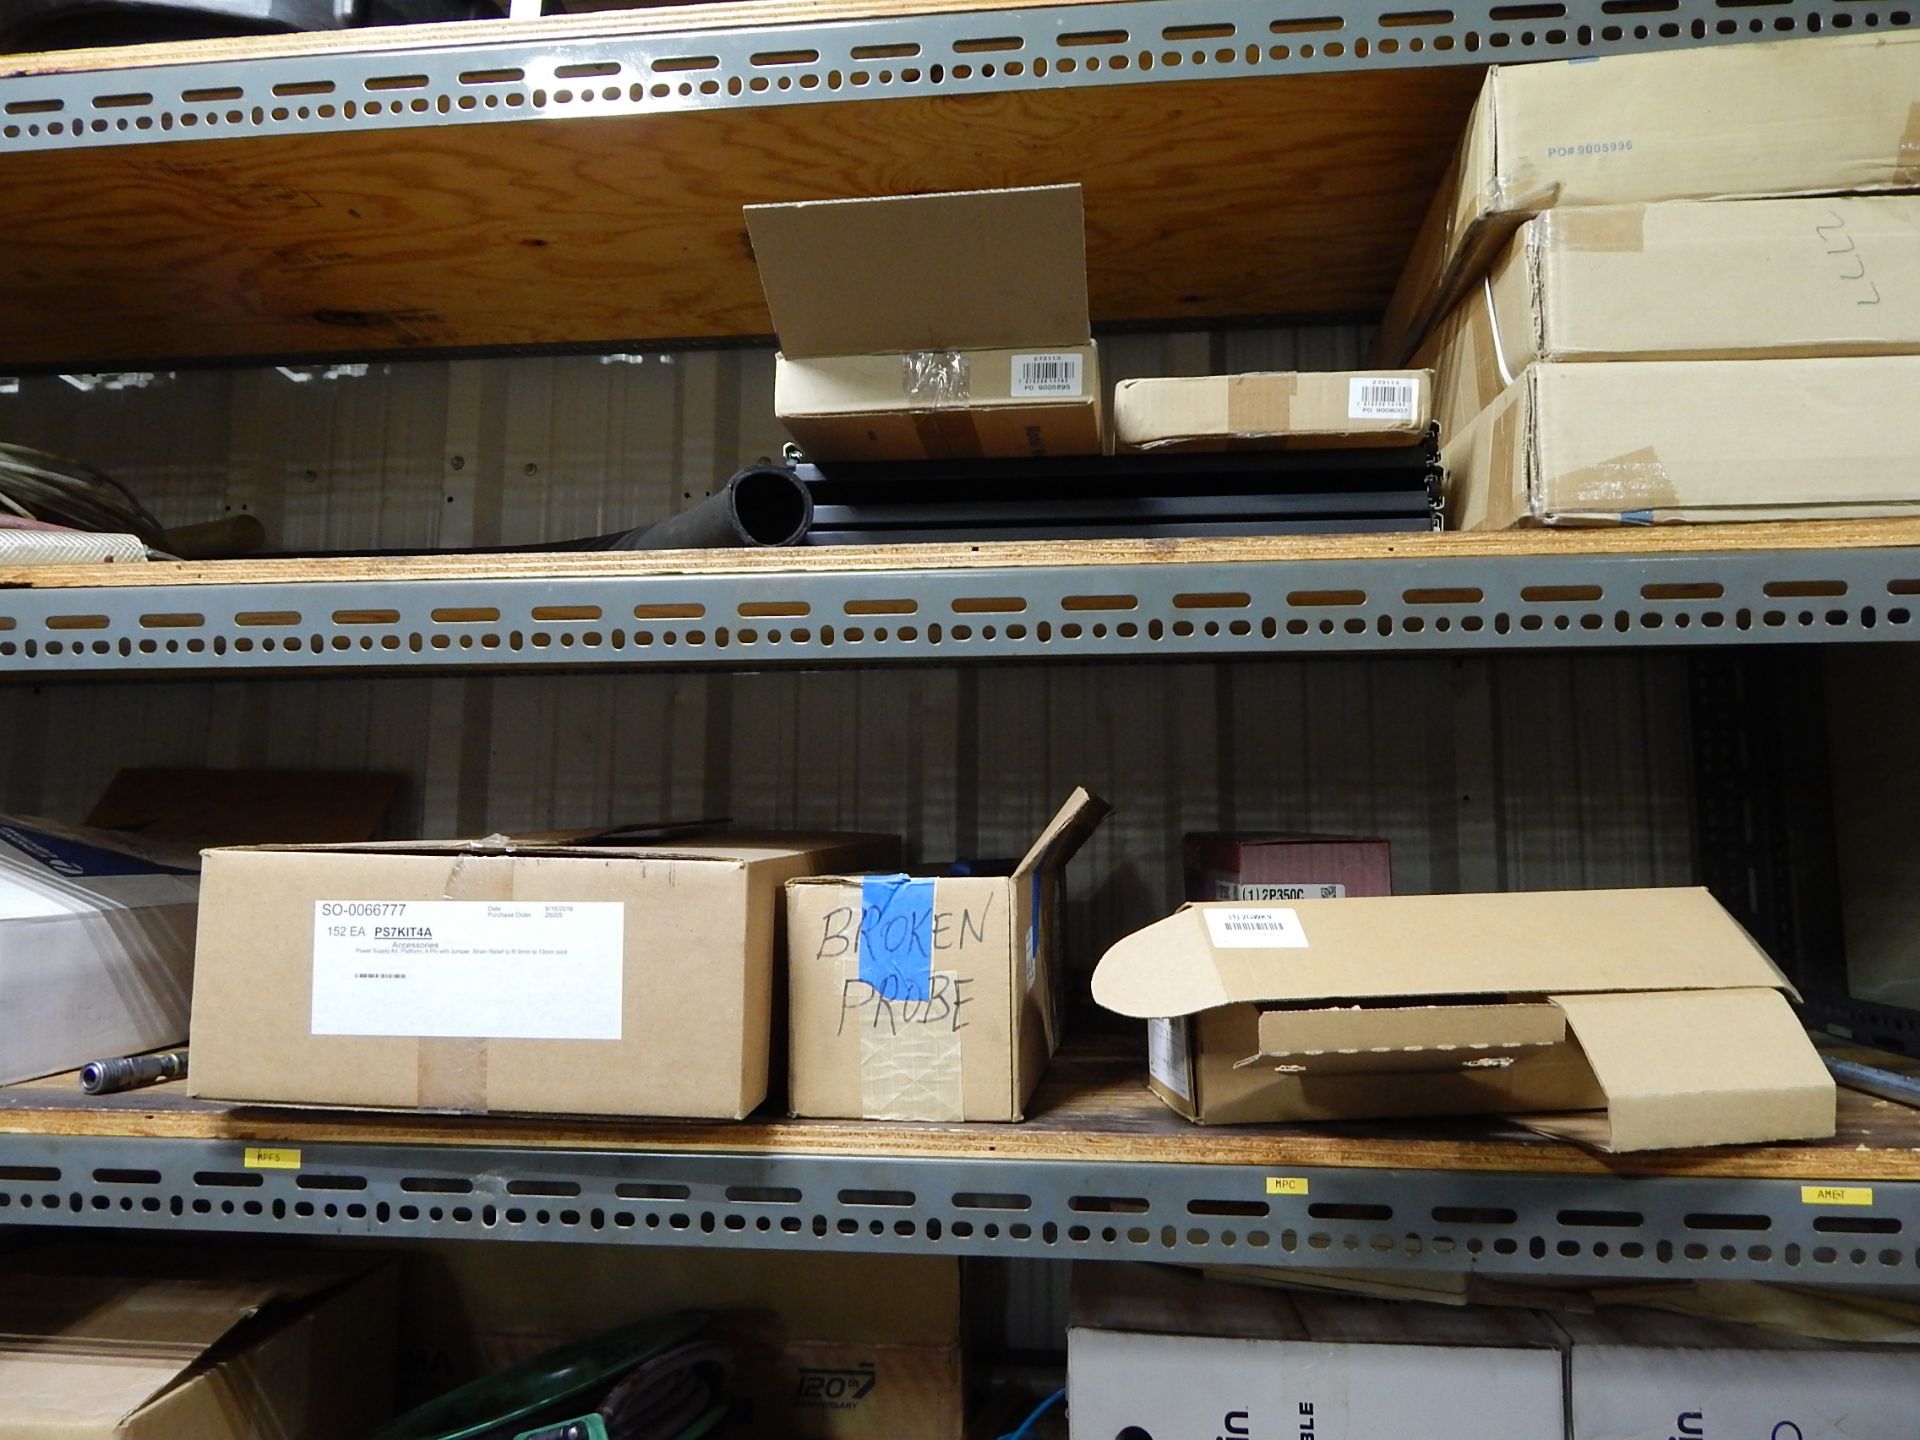 Metal Shelving and Contents of MRO Items - Image 4 of 4